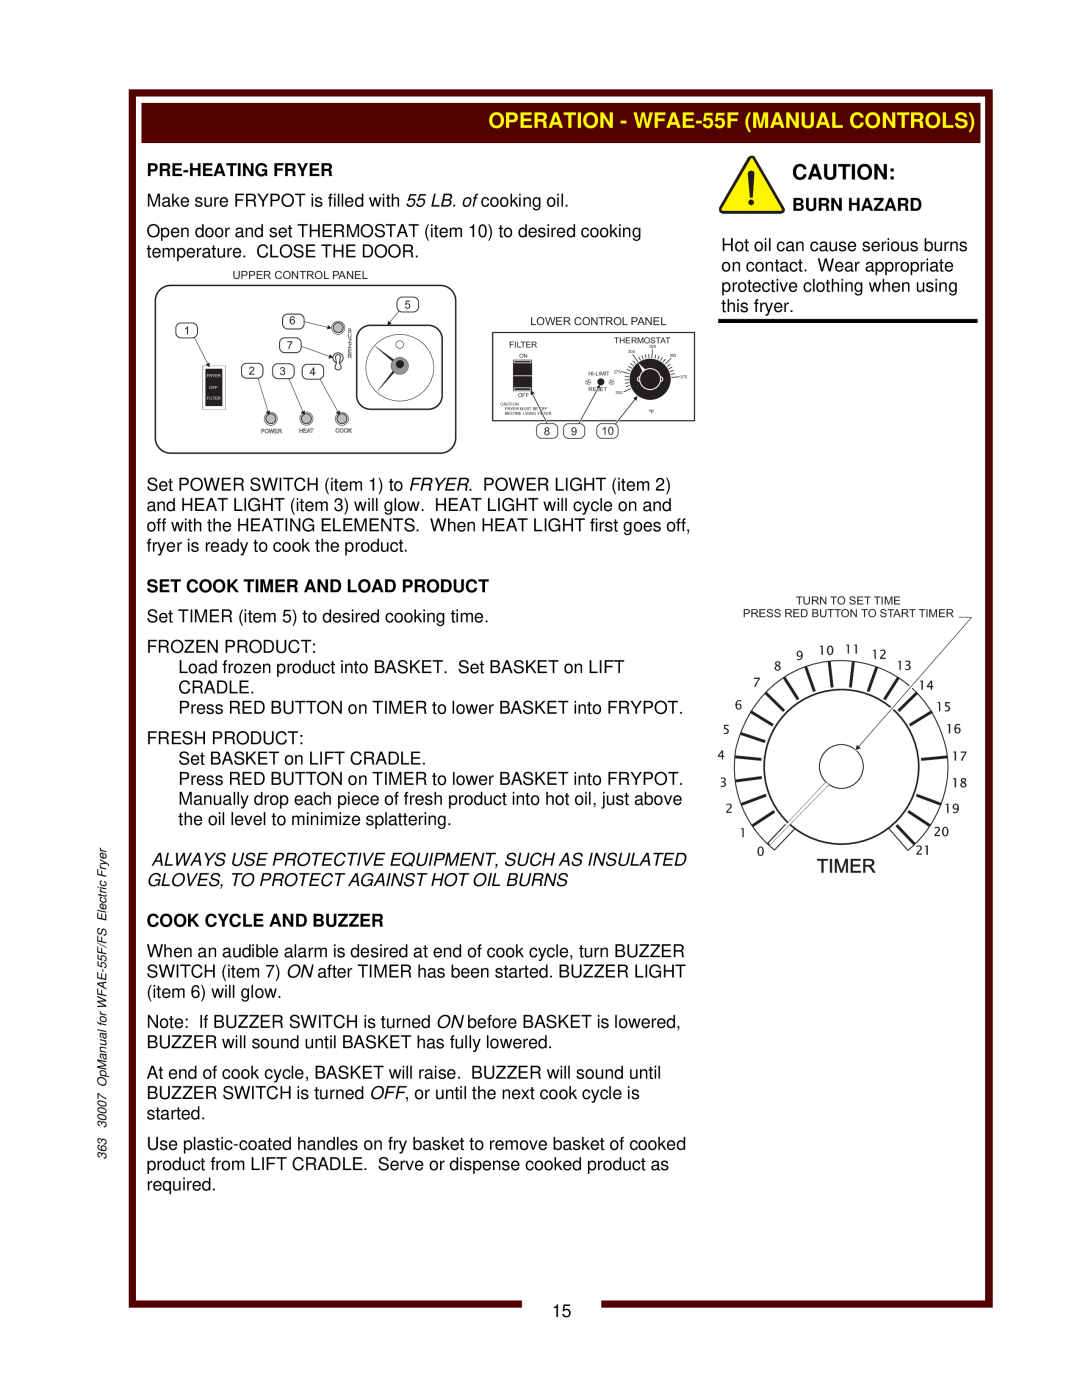 Wells WFAE-55F operation manual Pre-Heatingfryer, Burn Hazard, Set Cook Timer And Load Product, Cook Cycle And Buzzer 